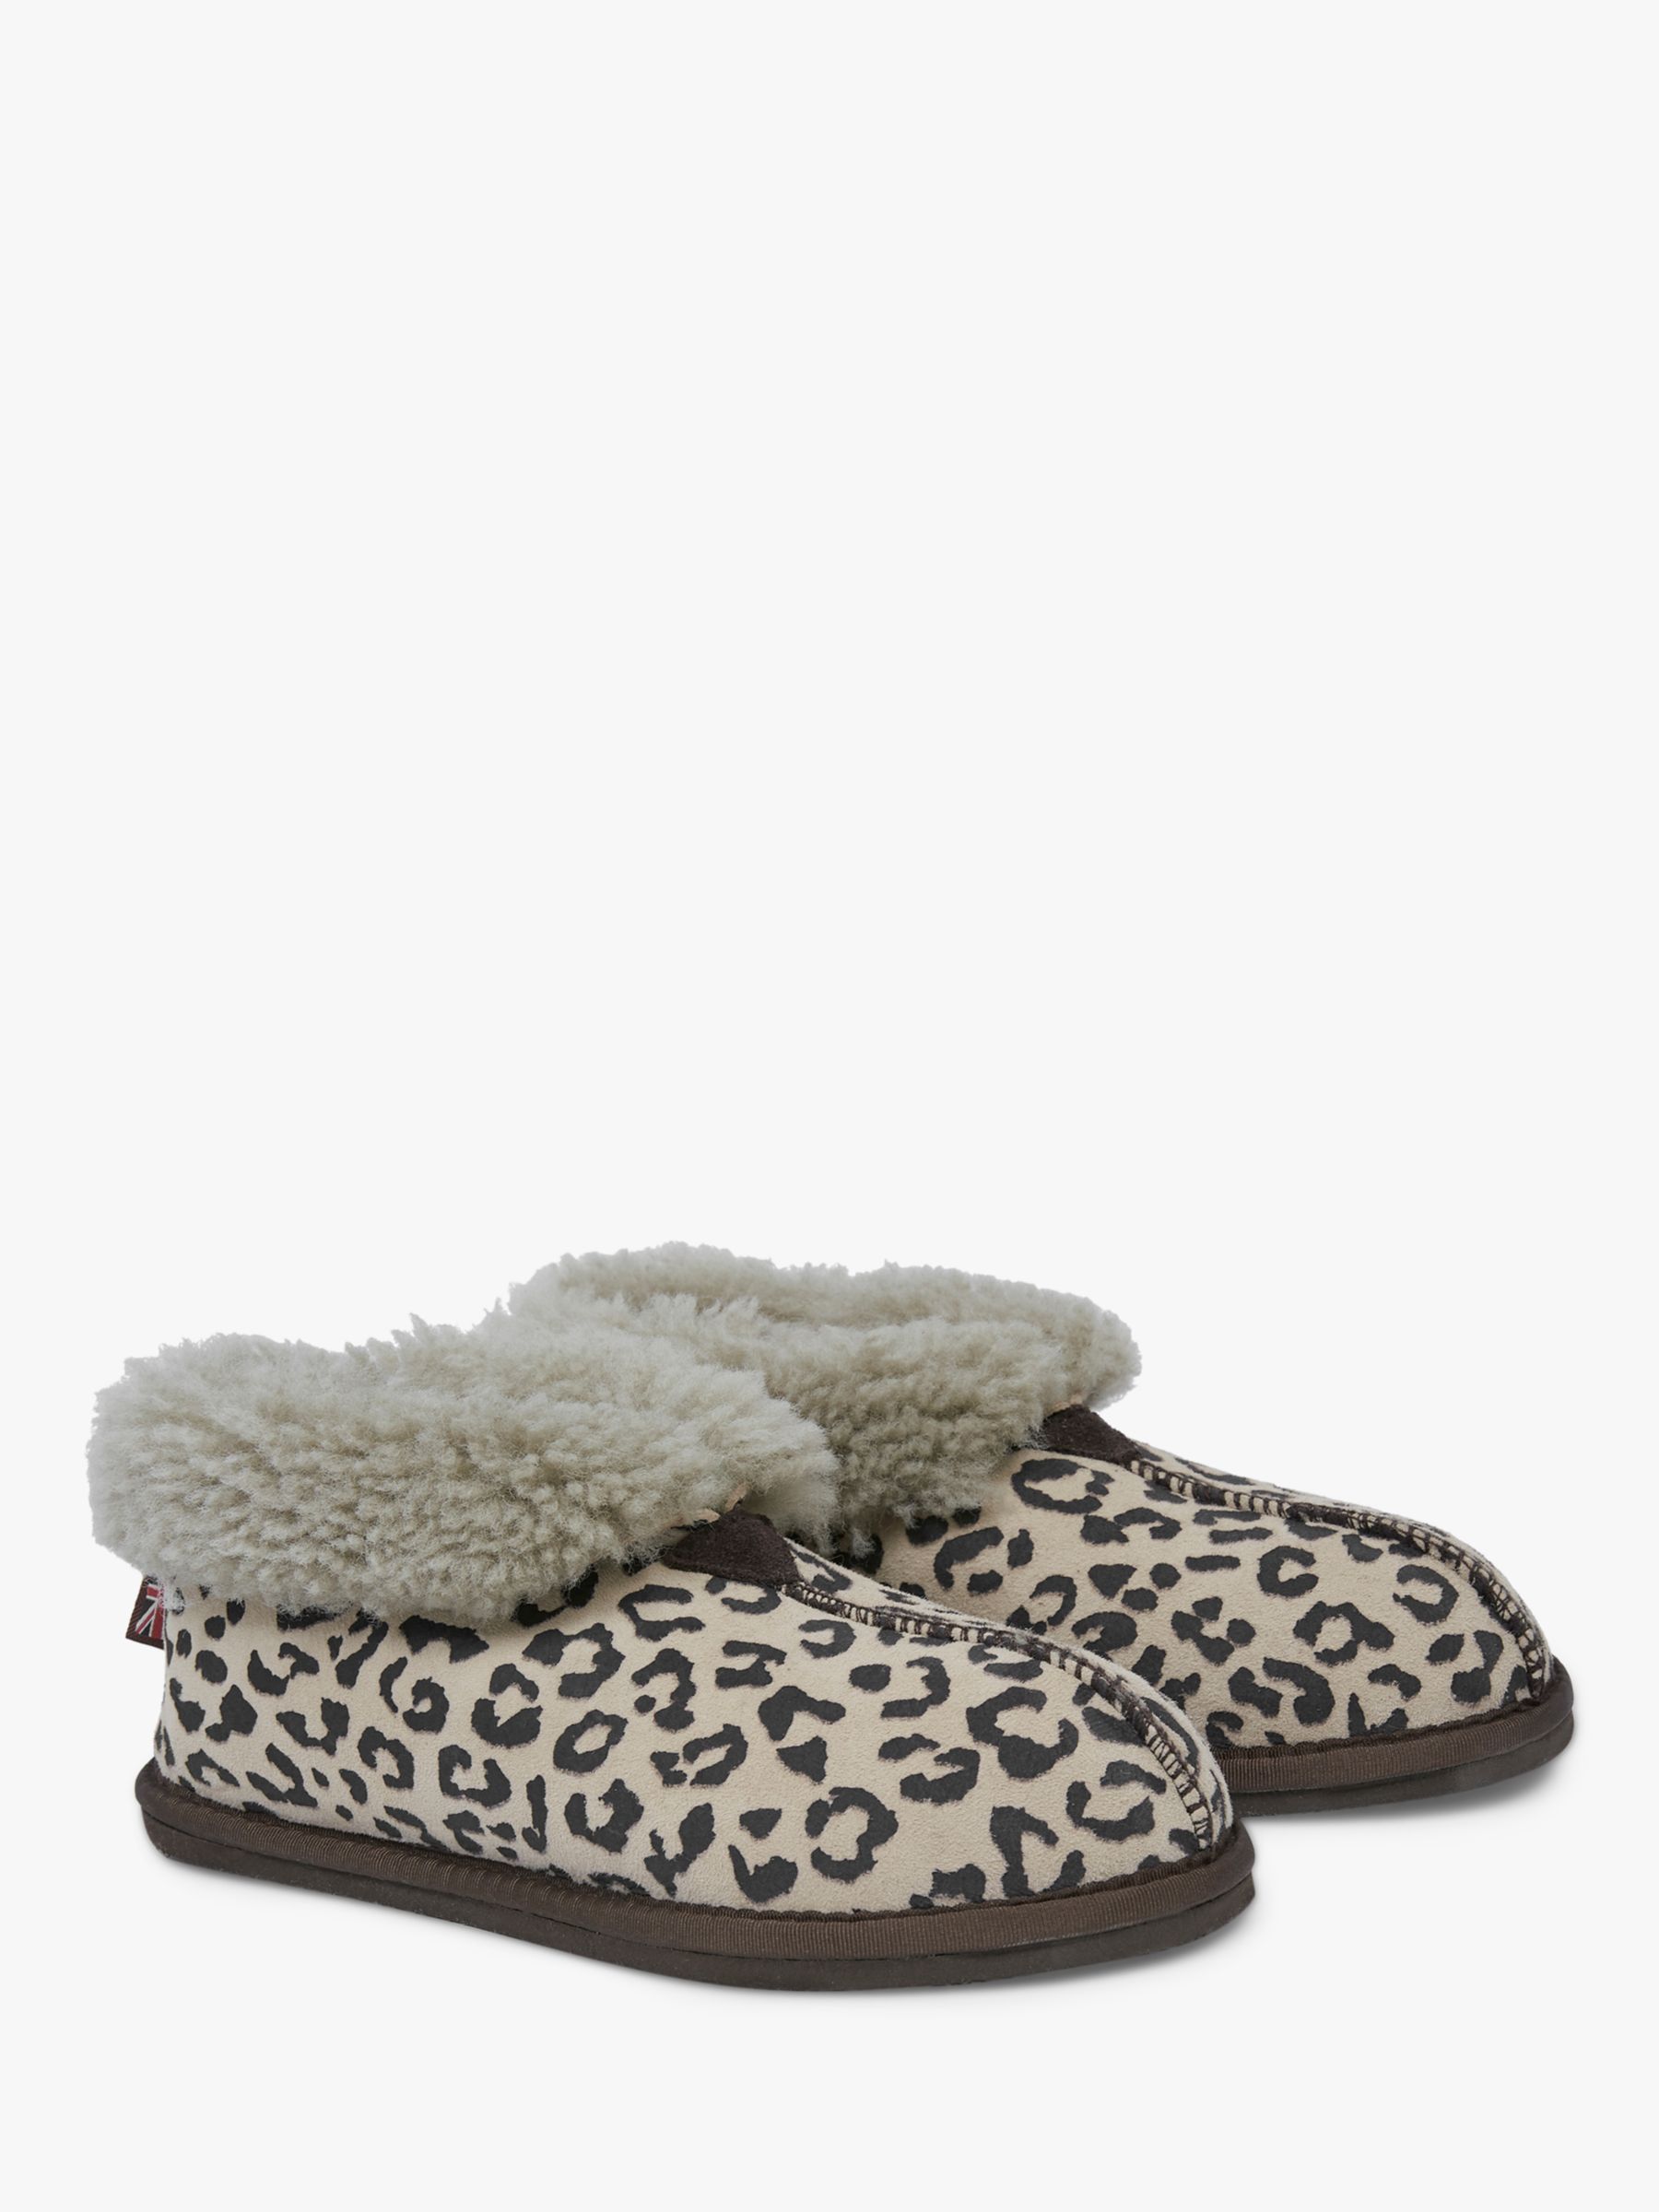 Buy Celtic & Co. Sheepskin Bootee Slippers, Leopard Online at johnlewis.com